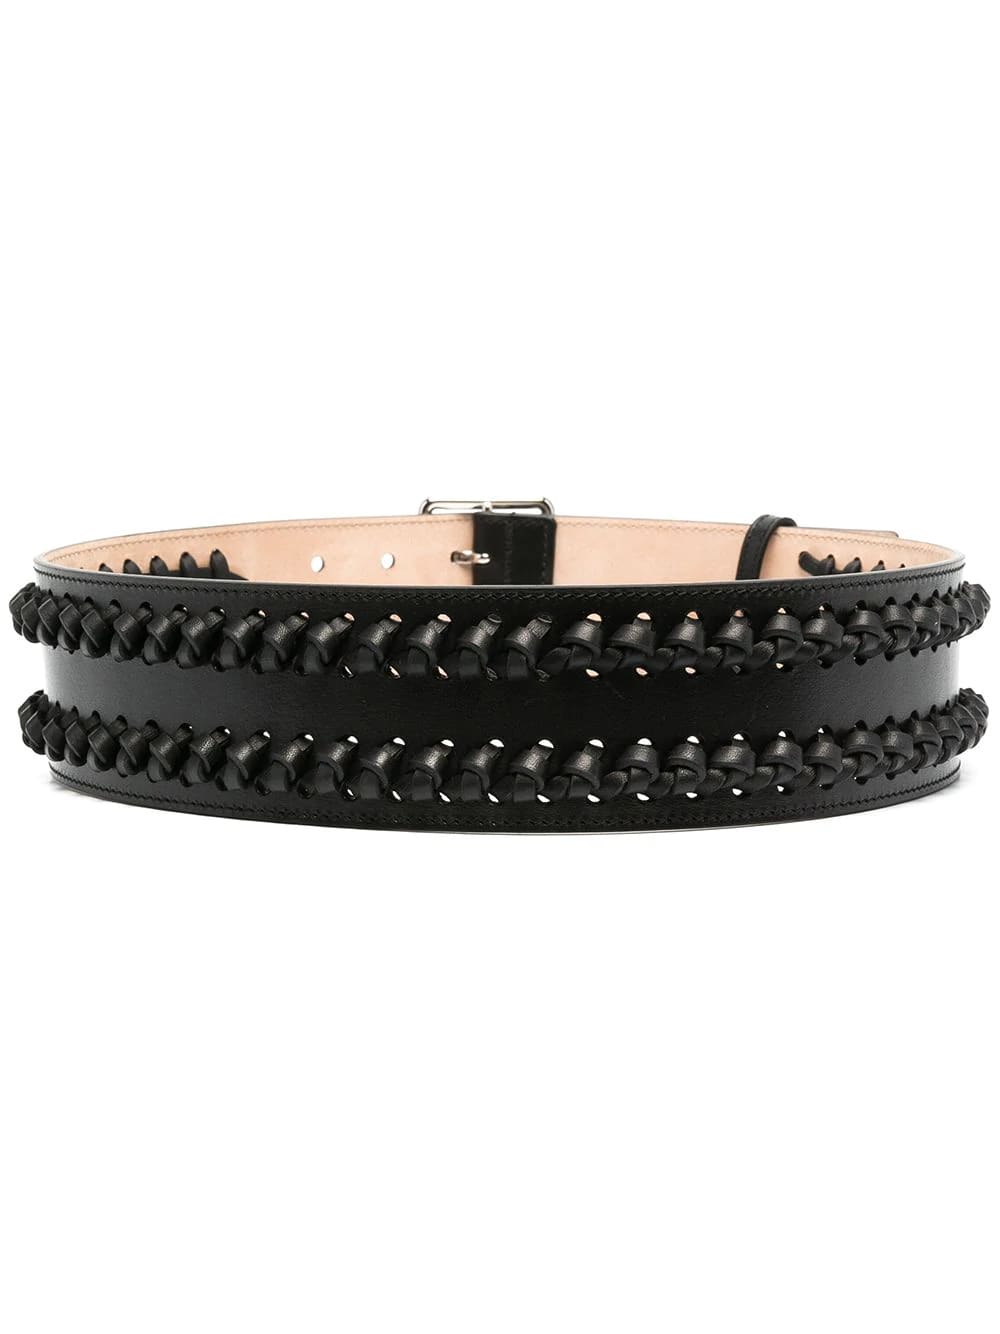 ALEXANDER MCQUEEN WOMAN BLACK MILITARY BELT WITH KNOTS,621405-1BR18 1000